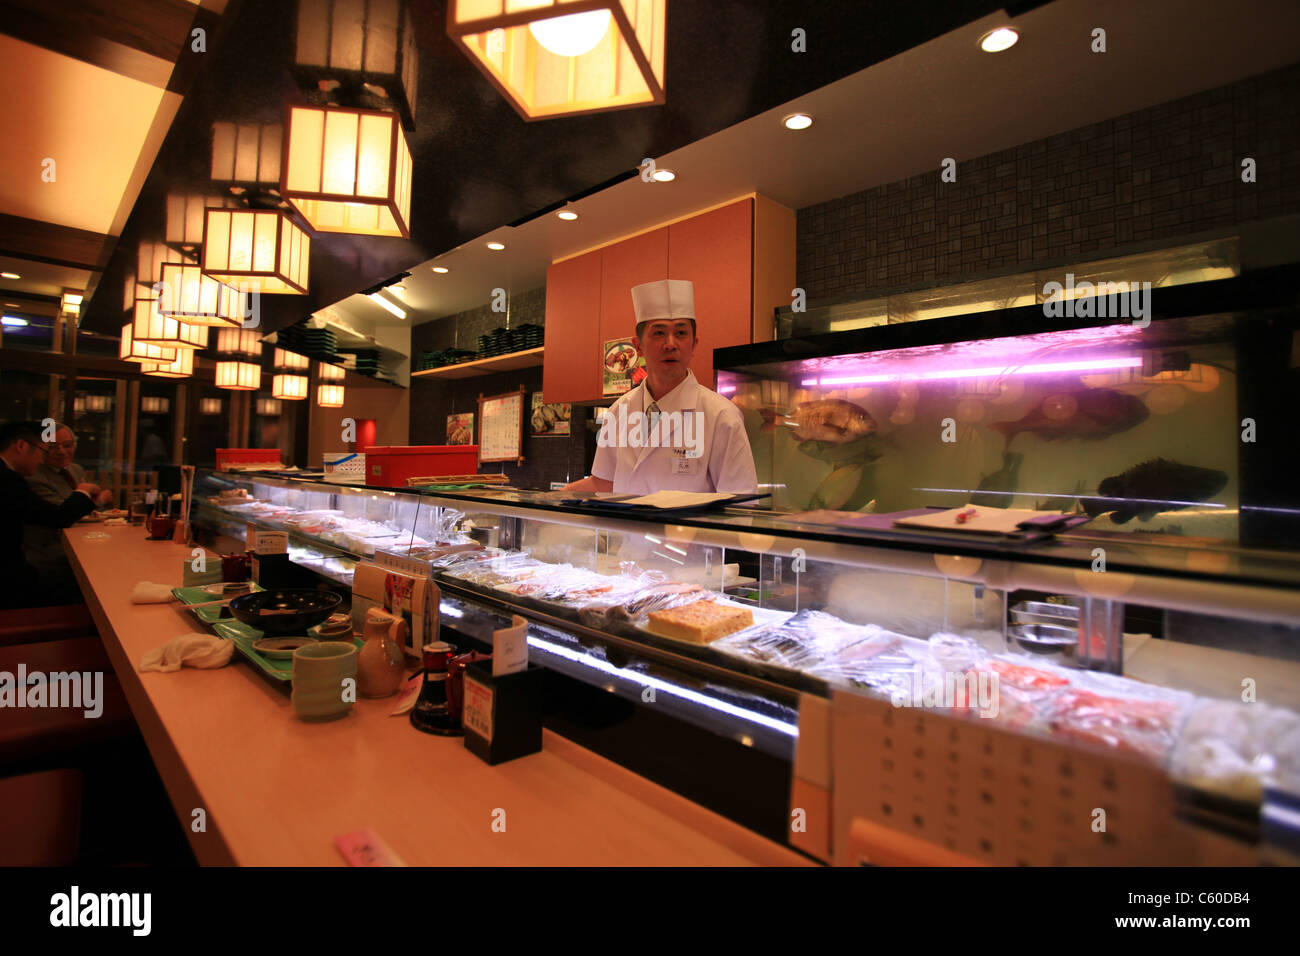 Traditional Japanese restaurant in Tokyo 2011 Stock Photo: 38119176 - Alamy